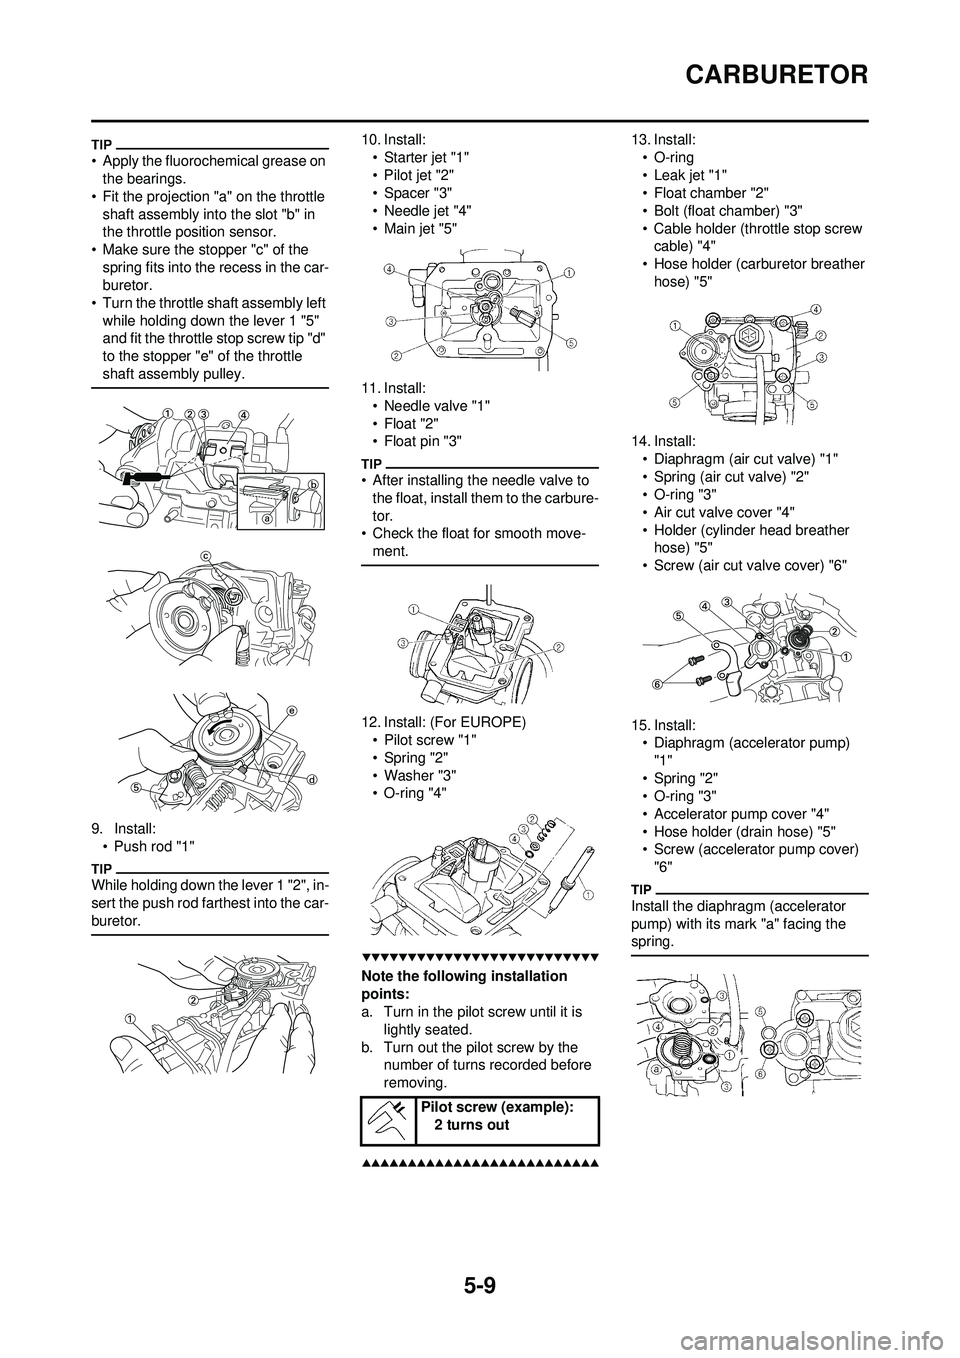 YAMAHA WR 250F 2009  Owners Manual 5-9
CARBURETOR
• Apply the fluorochemical grease on the bearings.
• Fit the projection "a" on the throttle  shaft assembly into the slot "b" in 
the throttle position sensor.
• Make sure the sto